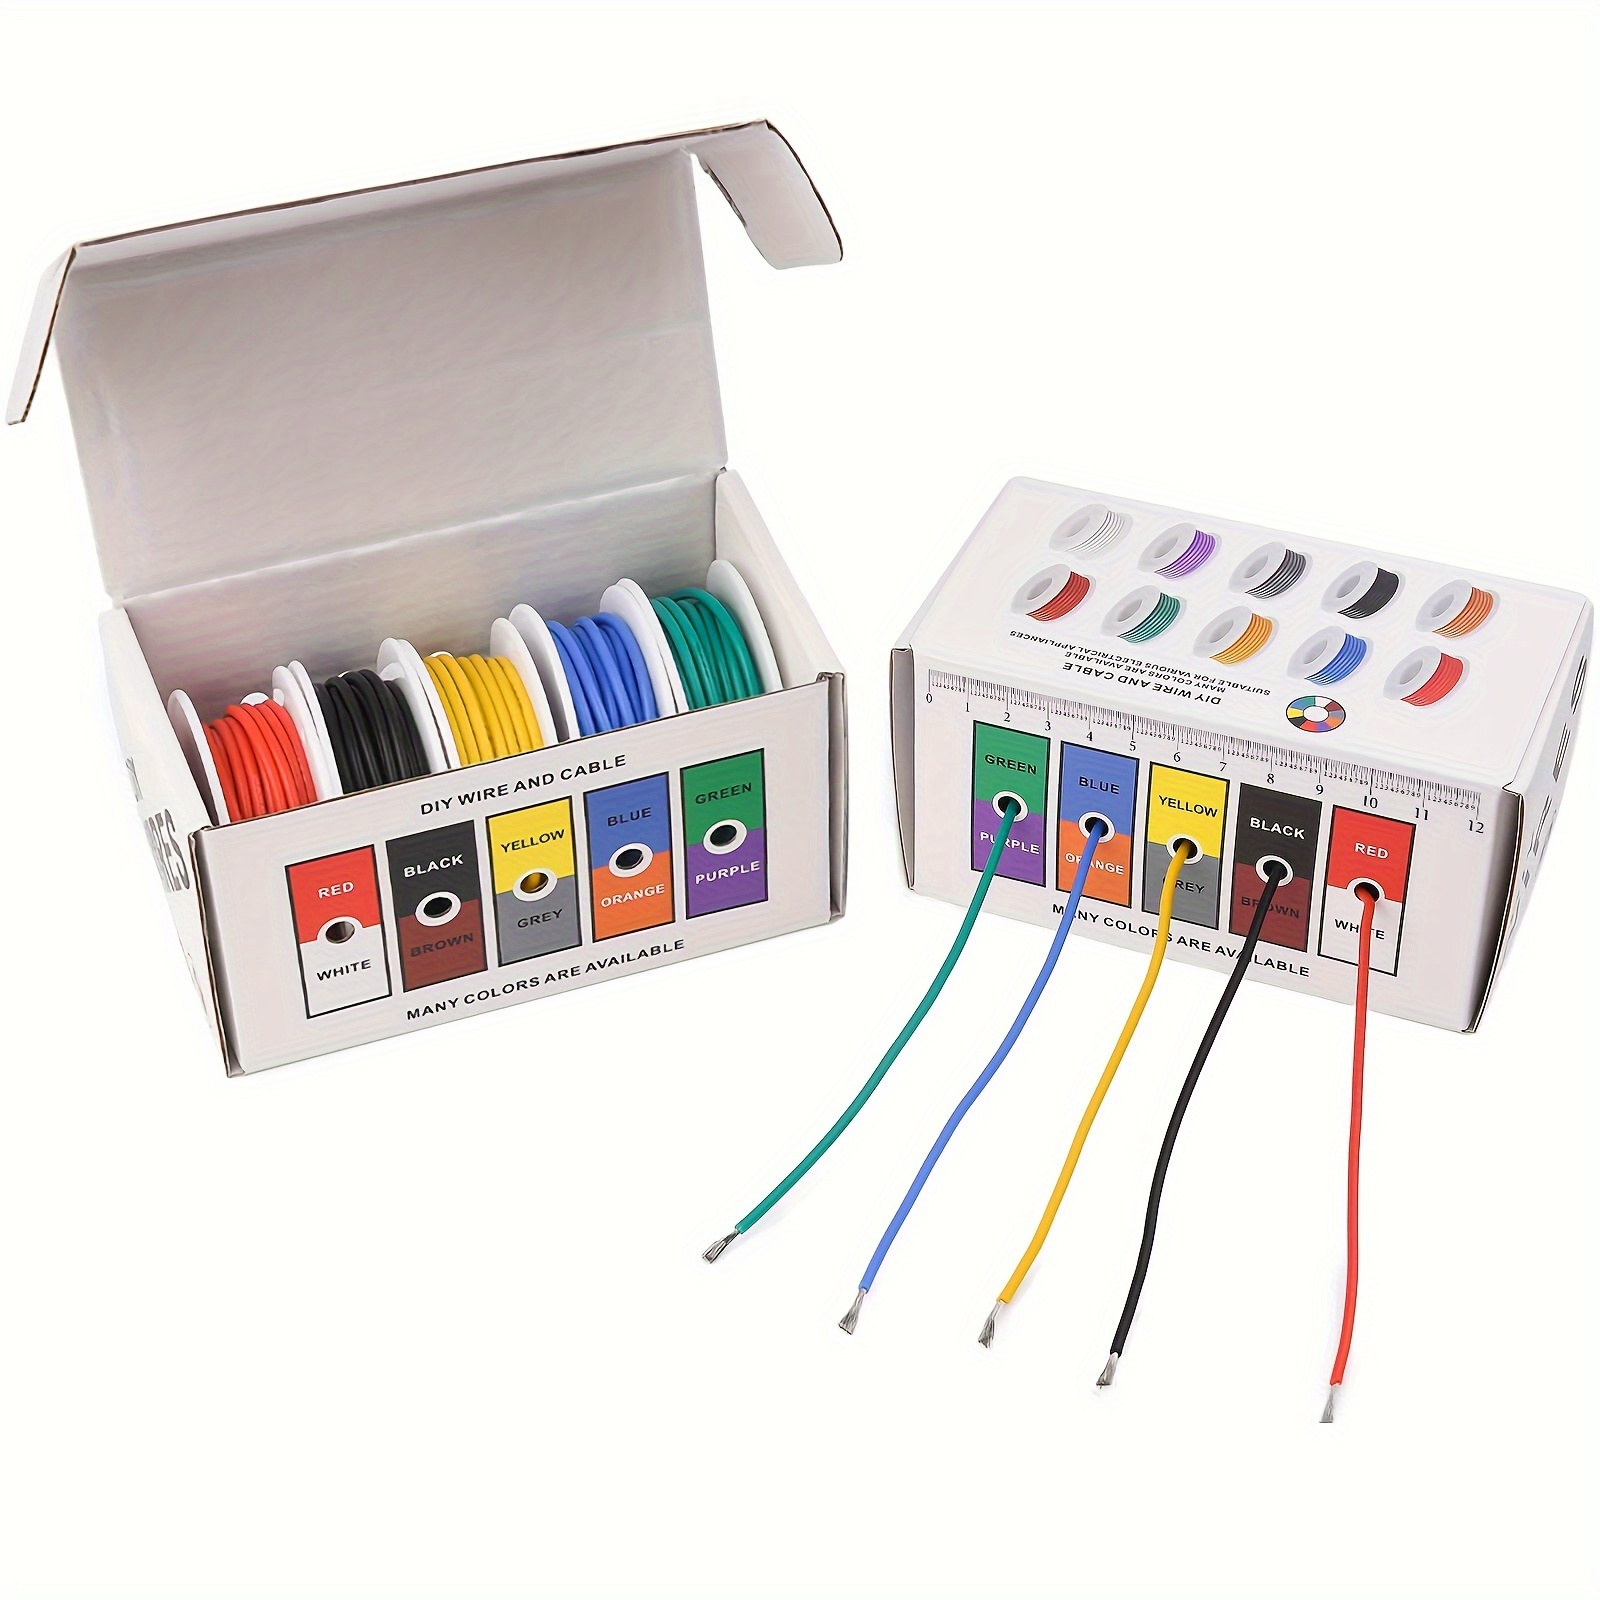 7 color Hookup Wires Kit: 18 30 Awg Silicone Electrical Wire